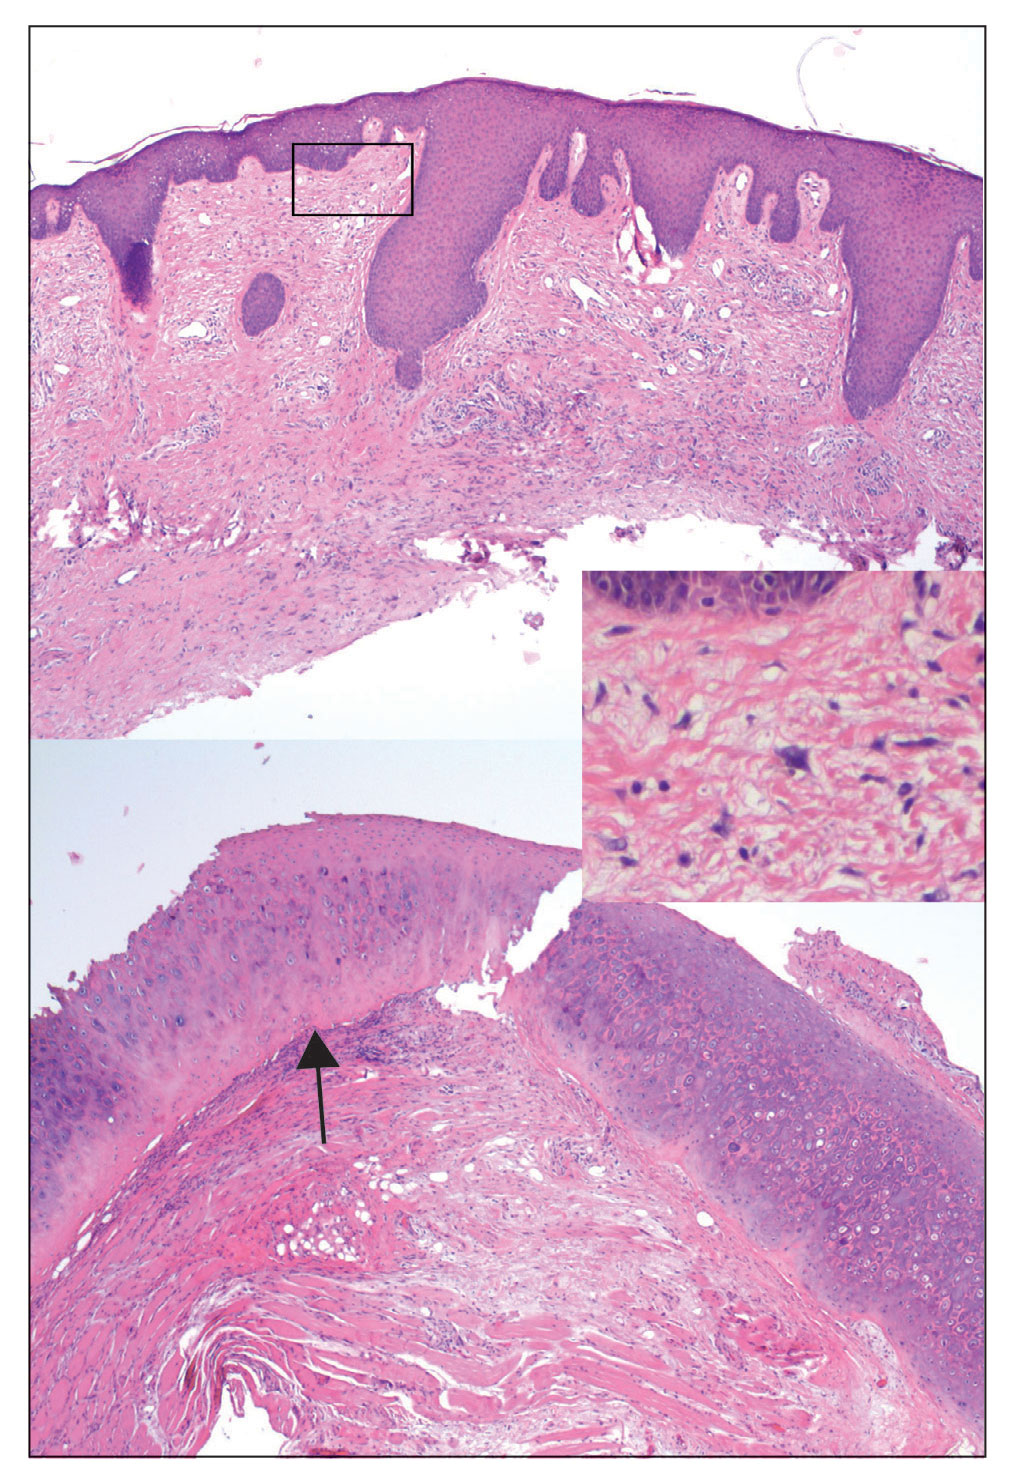 Top, Histopathology of a tangential biopsy revealed an acantholytic epidermis with dermal inflammation (H&E, original magnification ×40). Bottom, Higher-power view showed degenerated cartilage (arrow) consistent with chondrodermatitis nodularis helicis